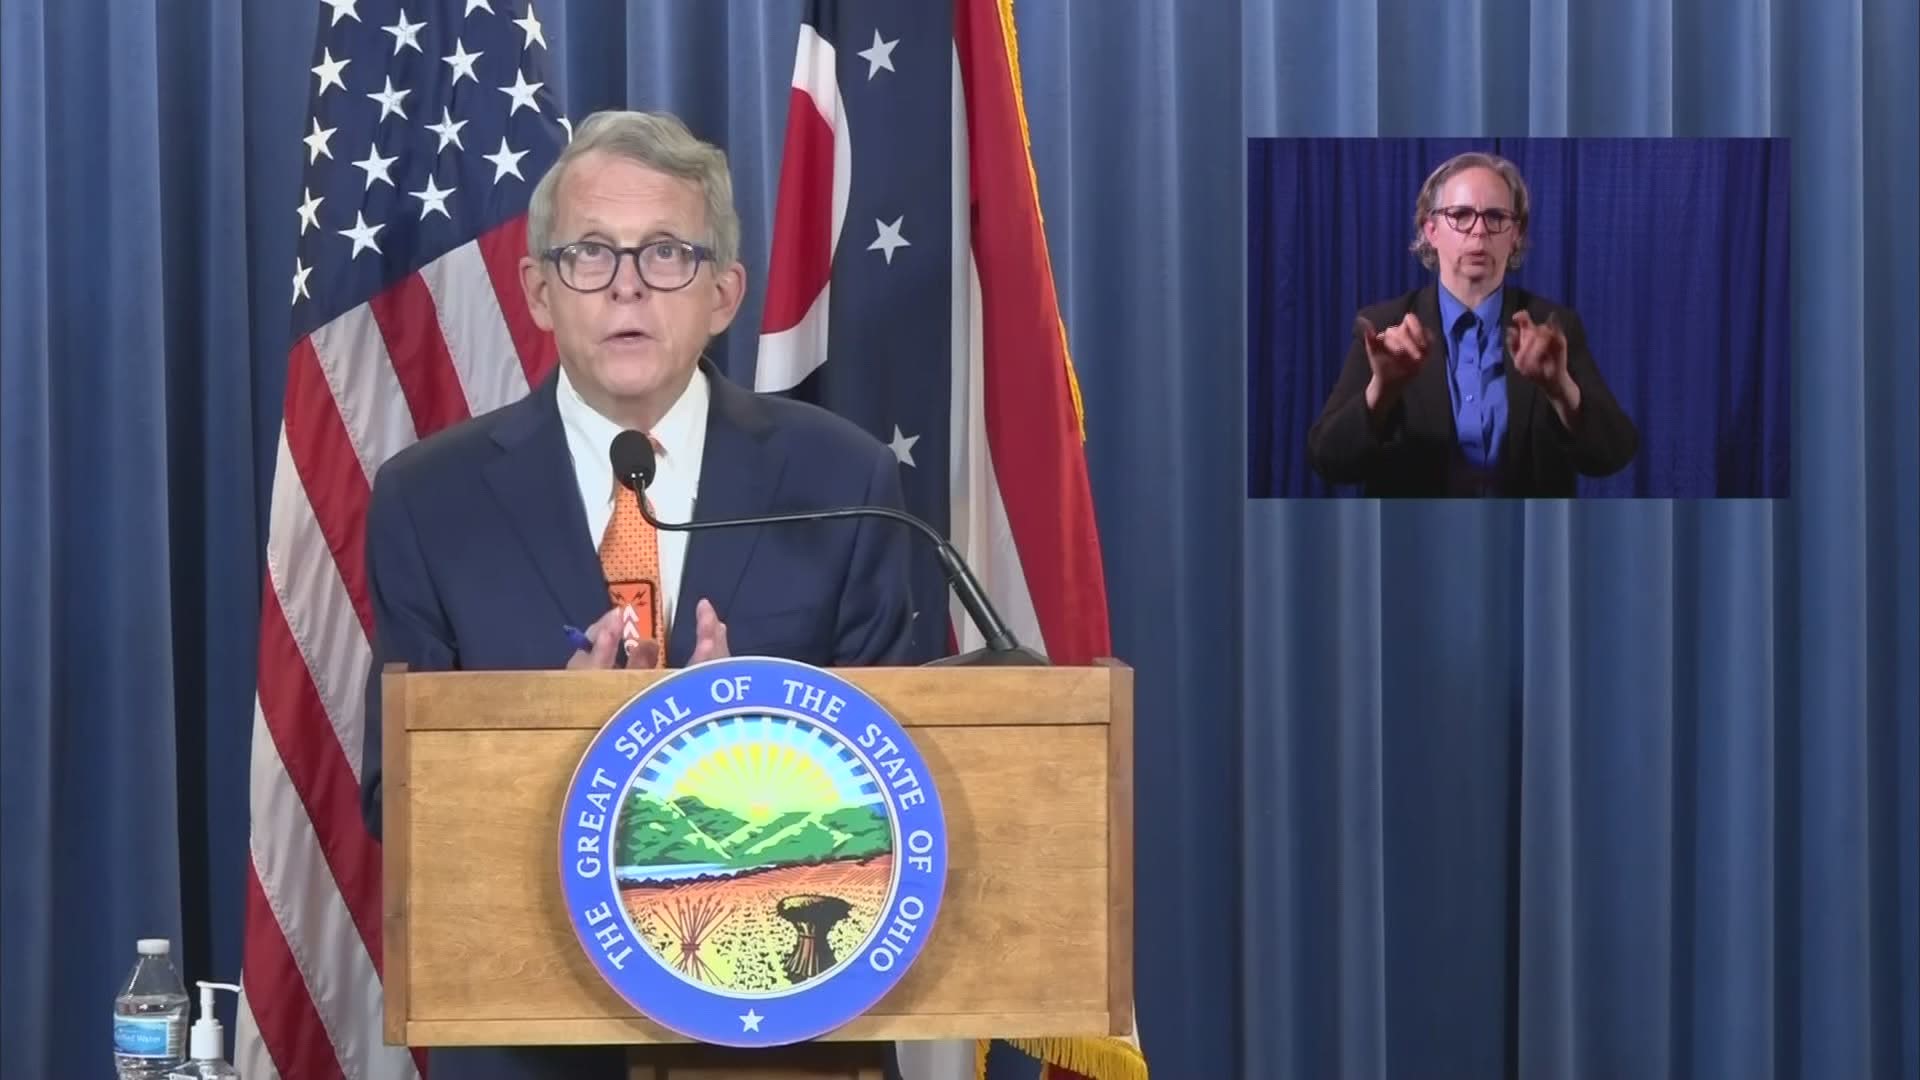 Gov. Mike DeWine announced what he referred to as meaningful law enforcement reform in Ohio.